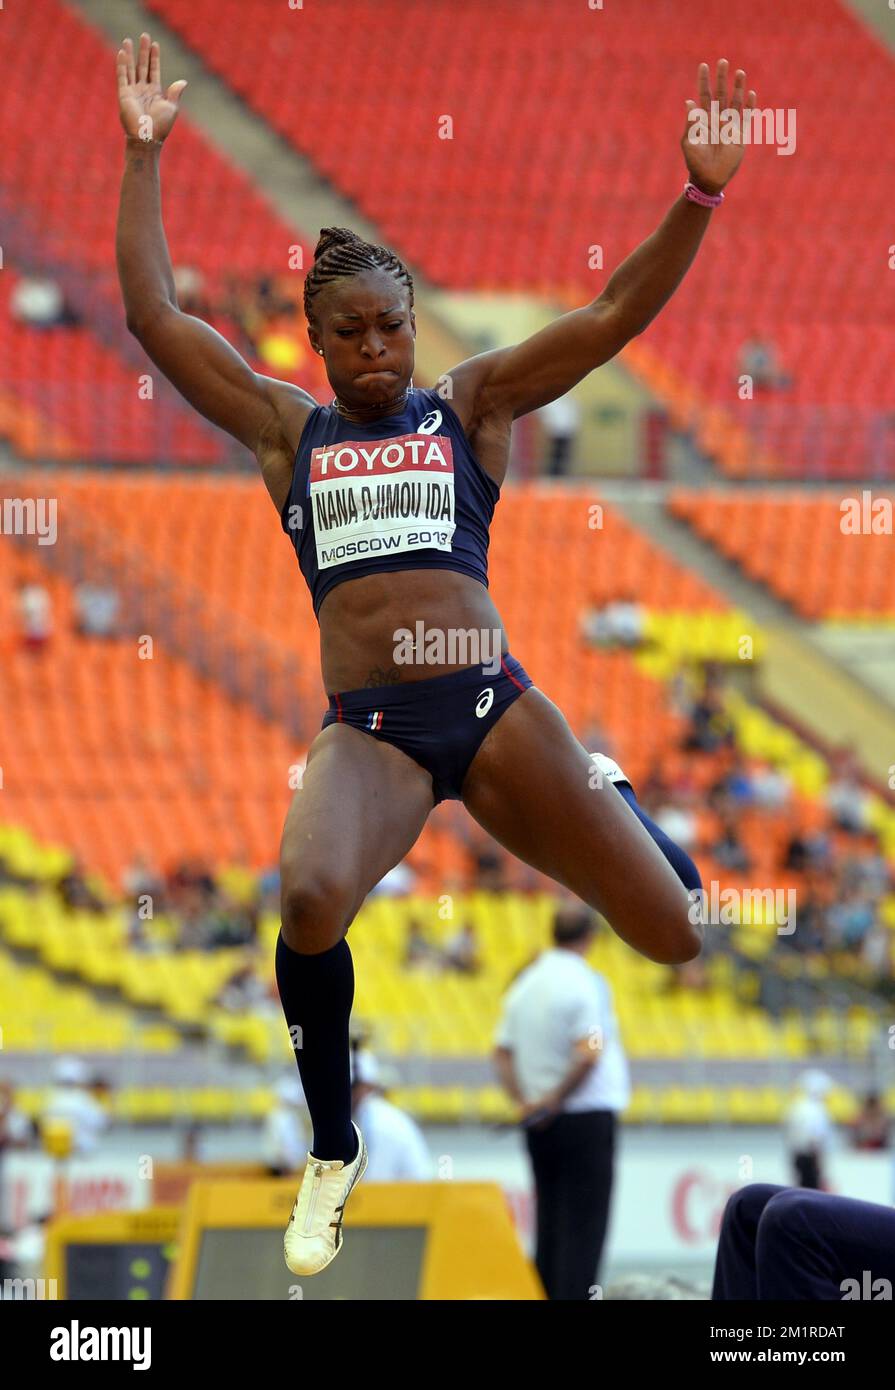 French Antoinette Nana Djimou Ida in action during the women's long jump competition on the second day of the women heptathlon at the World Athletics Championships at the Luzhniki Stadium in Moscow, Russia, Tuesday 13 August 2013. The World Championships are taking place from 10 to 18 August.  Stock Photo